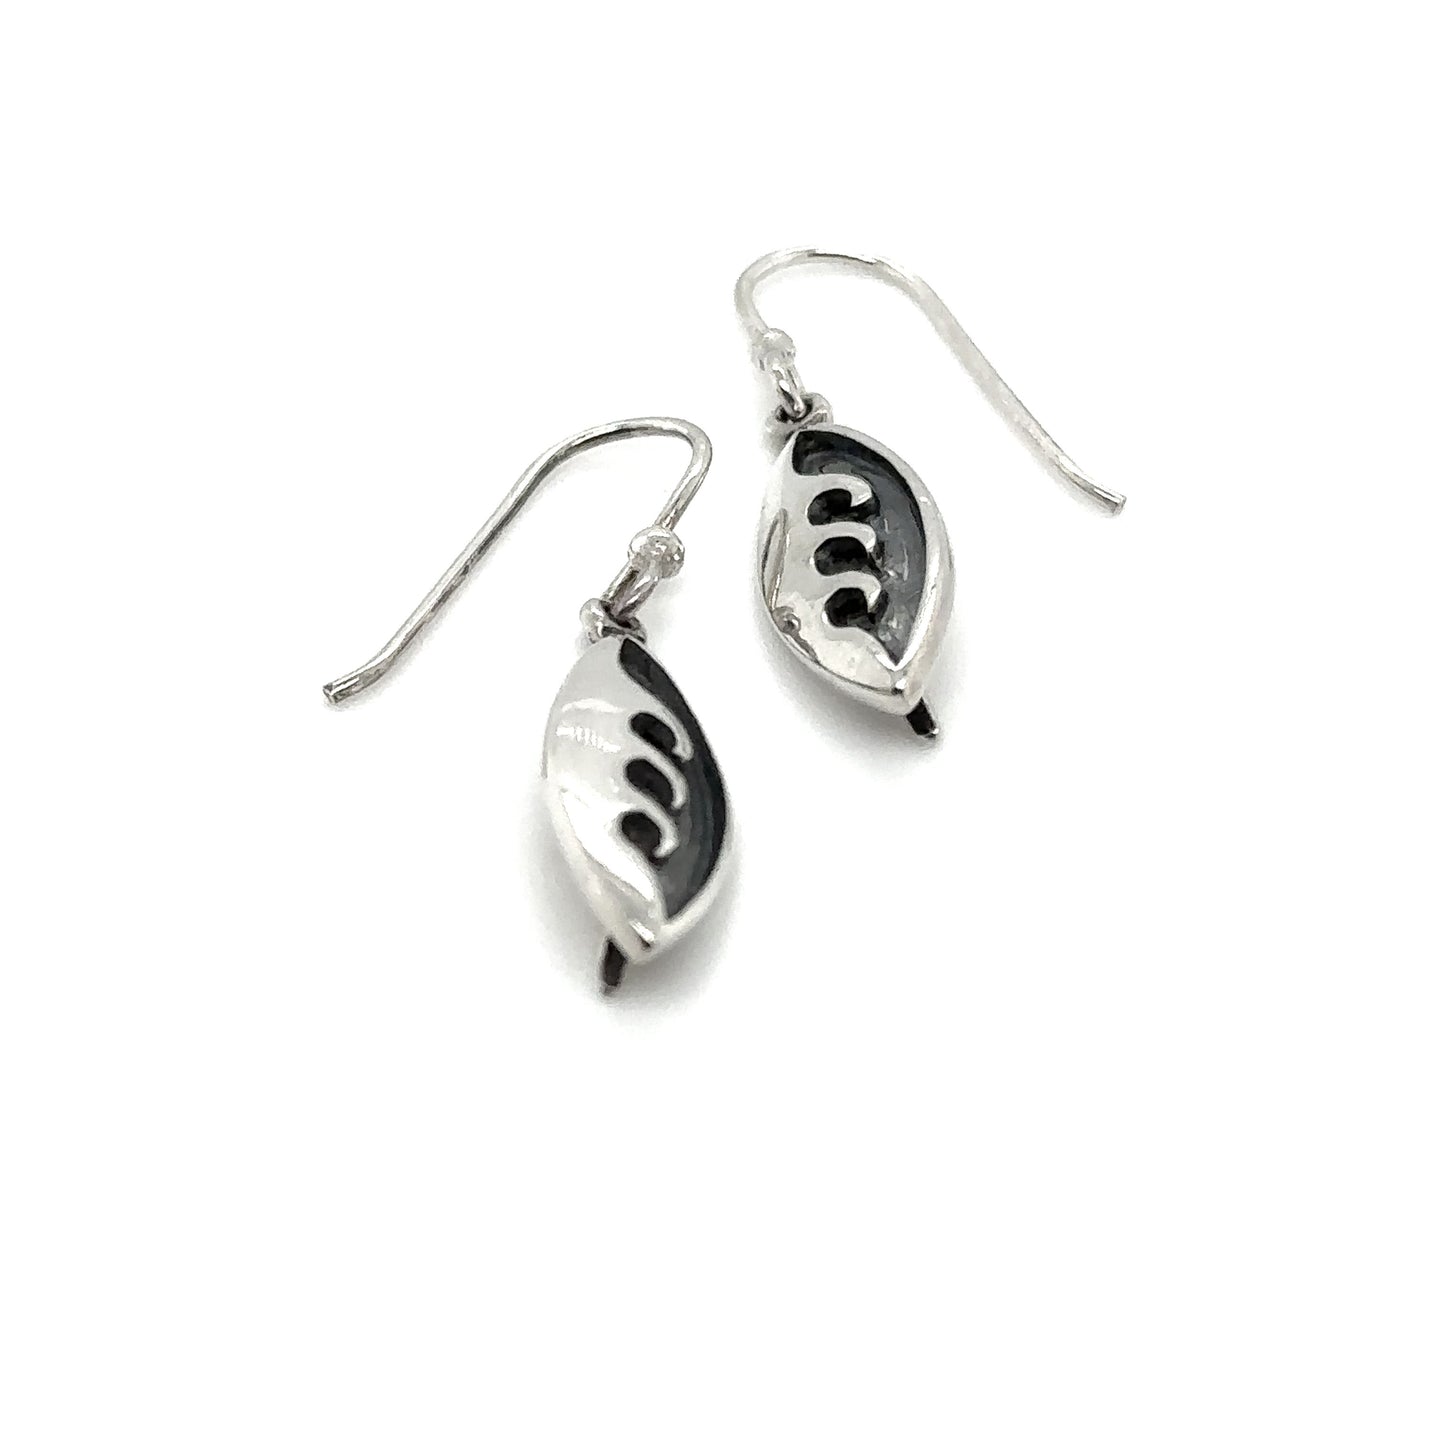 A pair of Super Silver Surfboard Earrings With Wave Detail, complete with sterling silver French hooks.